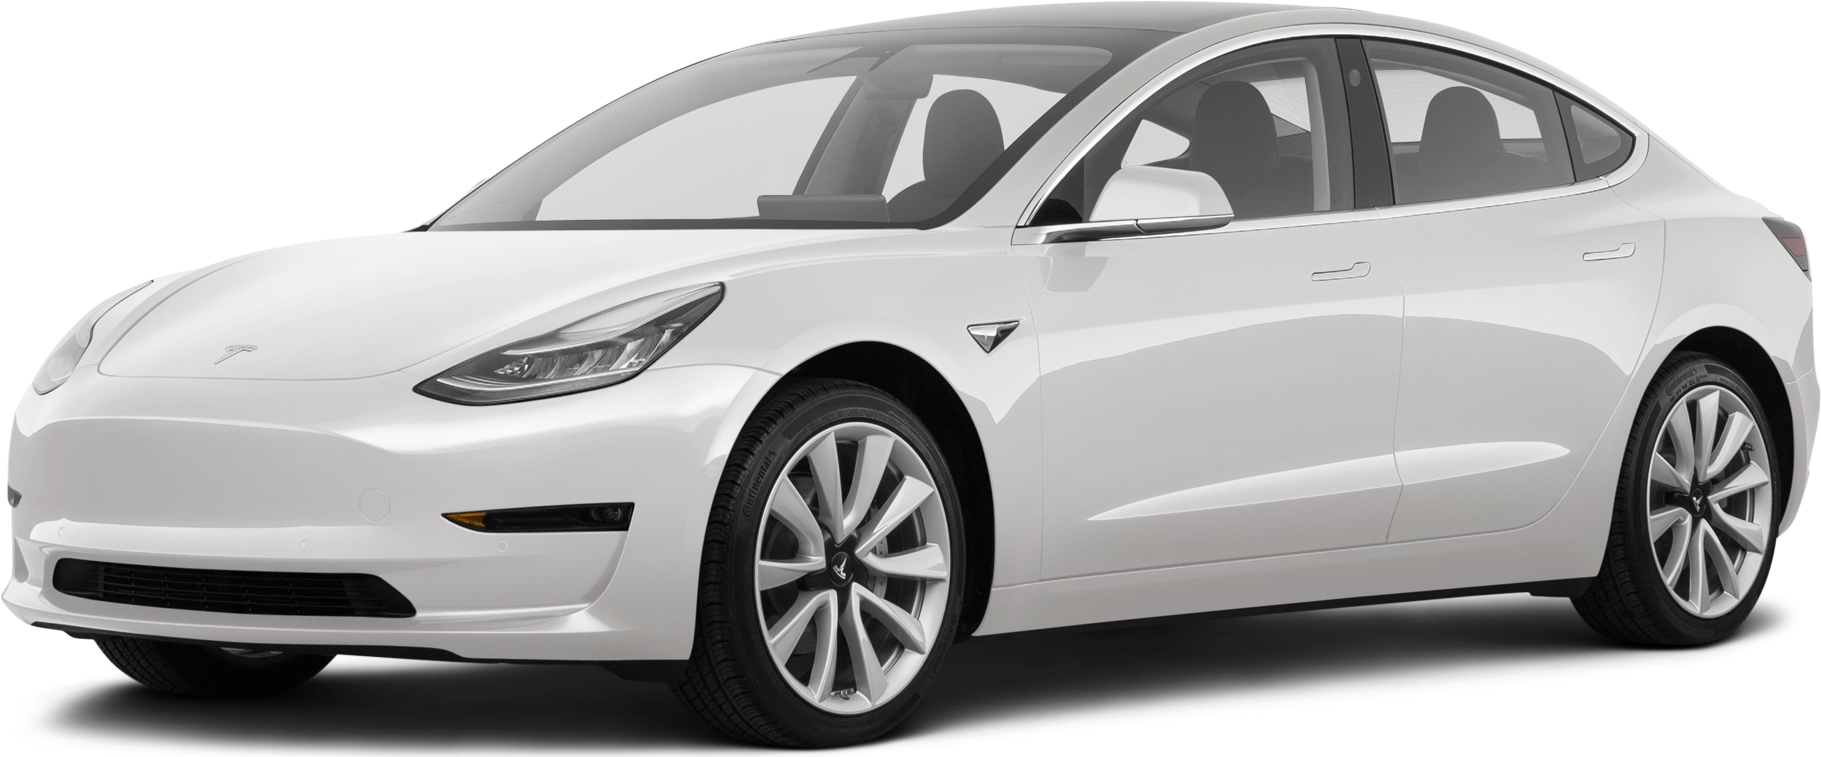 Maintaining Your Tesla: Everything You Need To Know - Kelley Blue Book